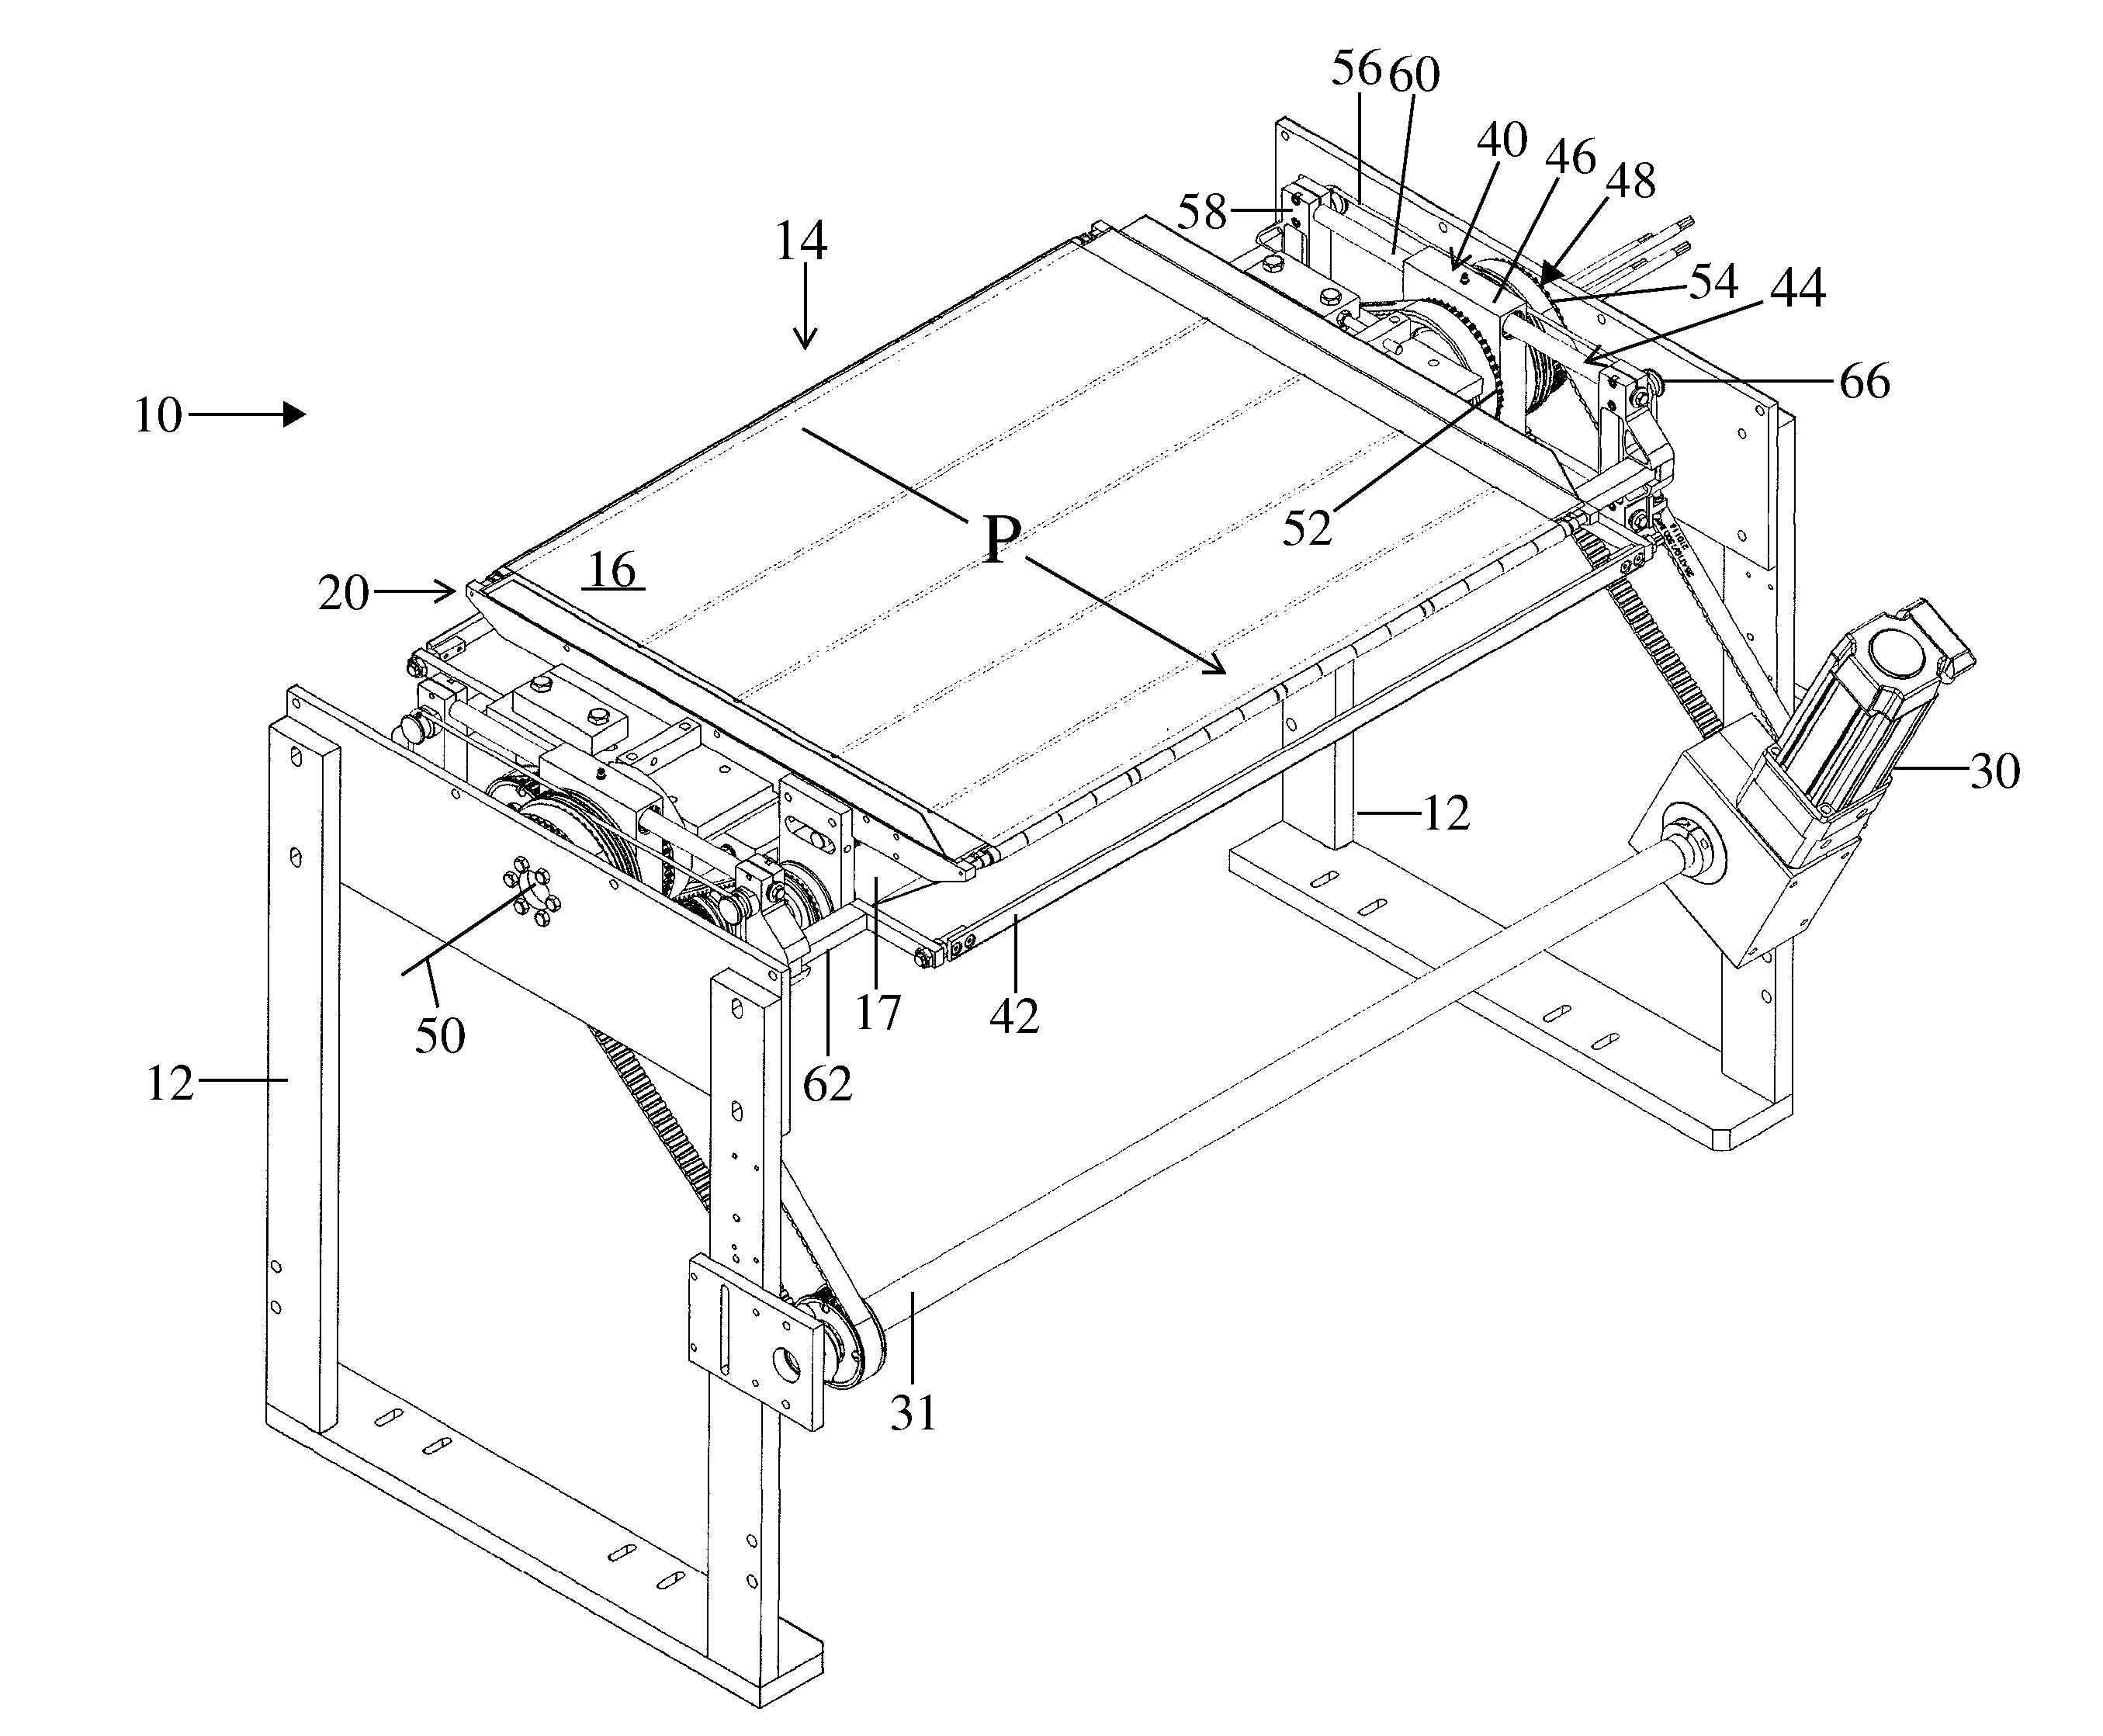 Apparatus for adjustable wrapping